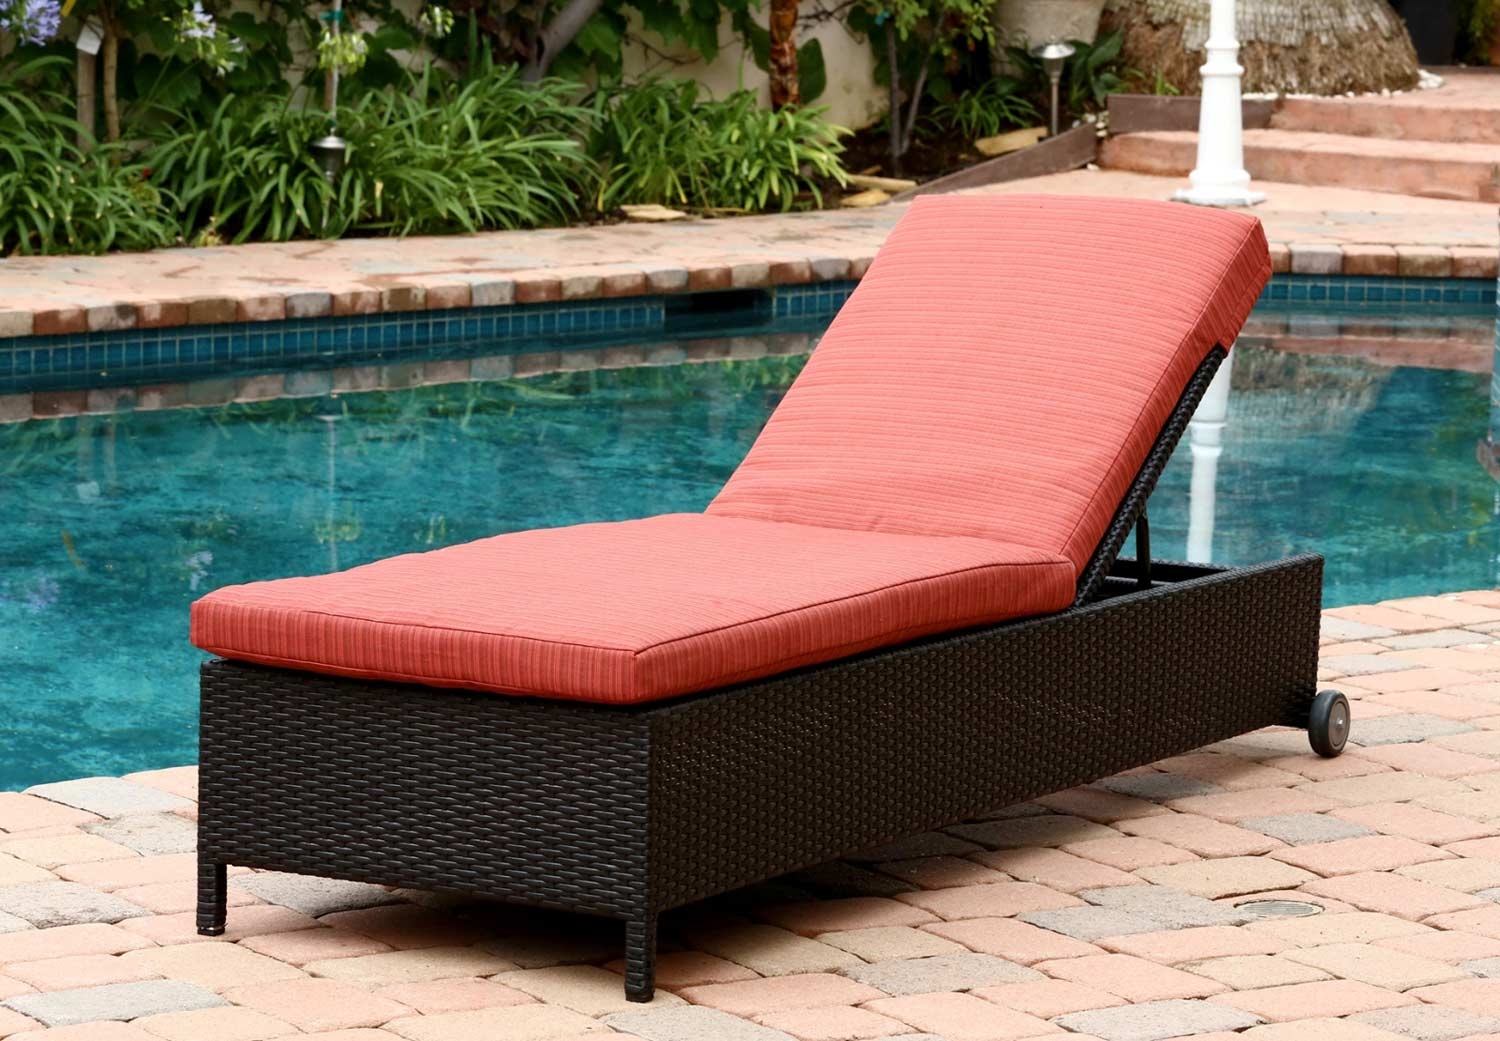 Wicker Chaise Lounges - Ideas on Foter